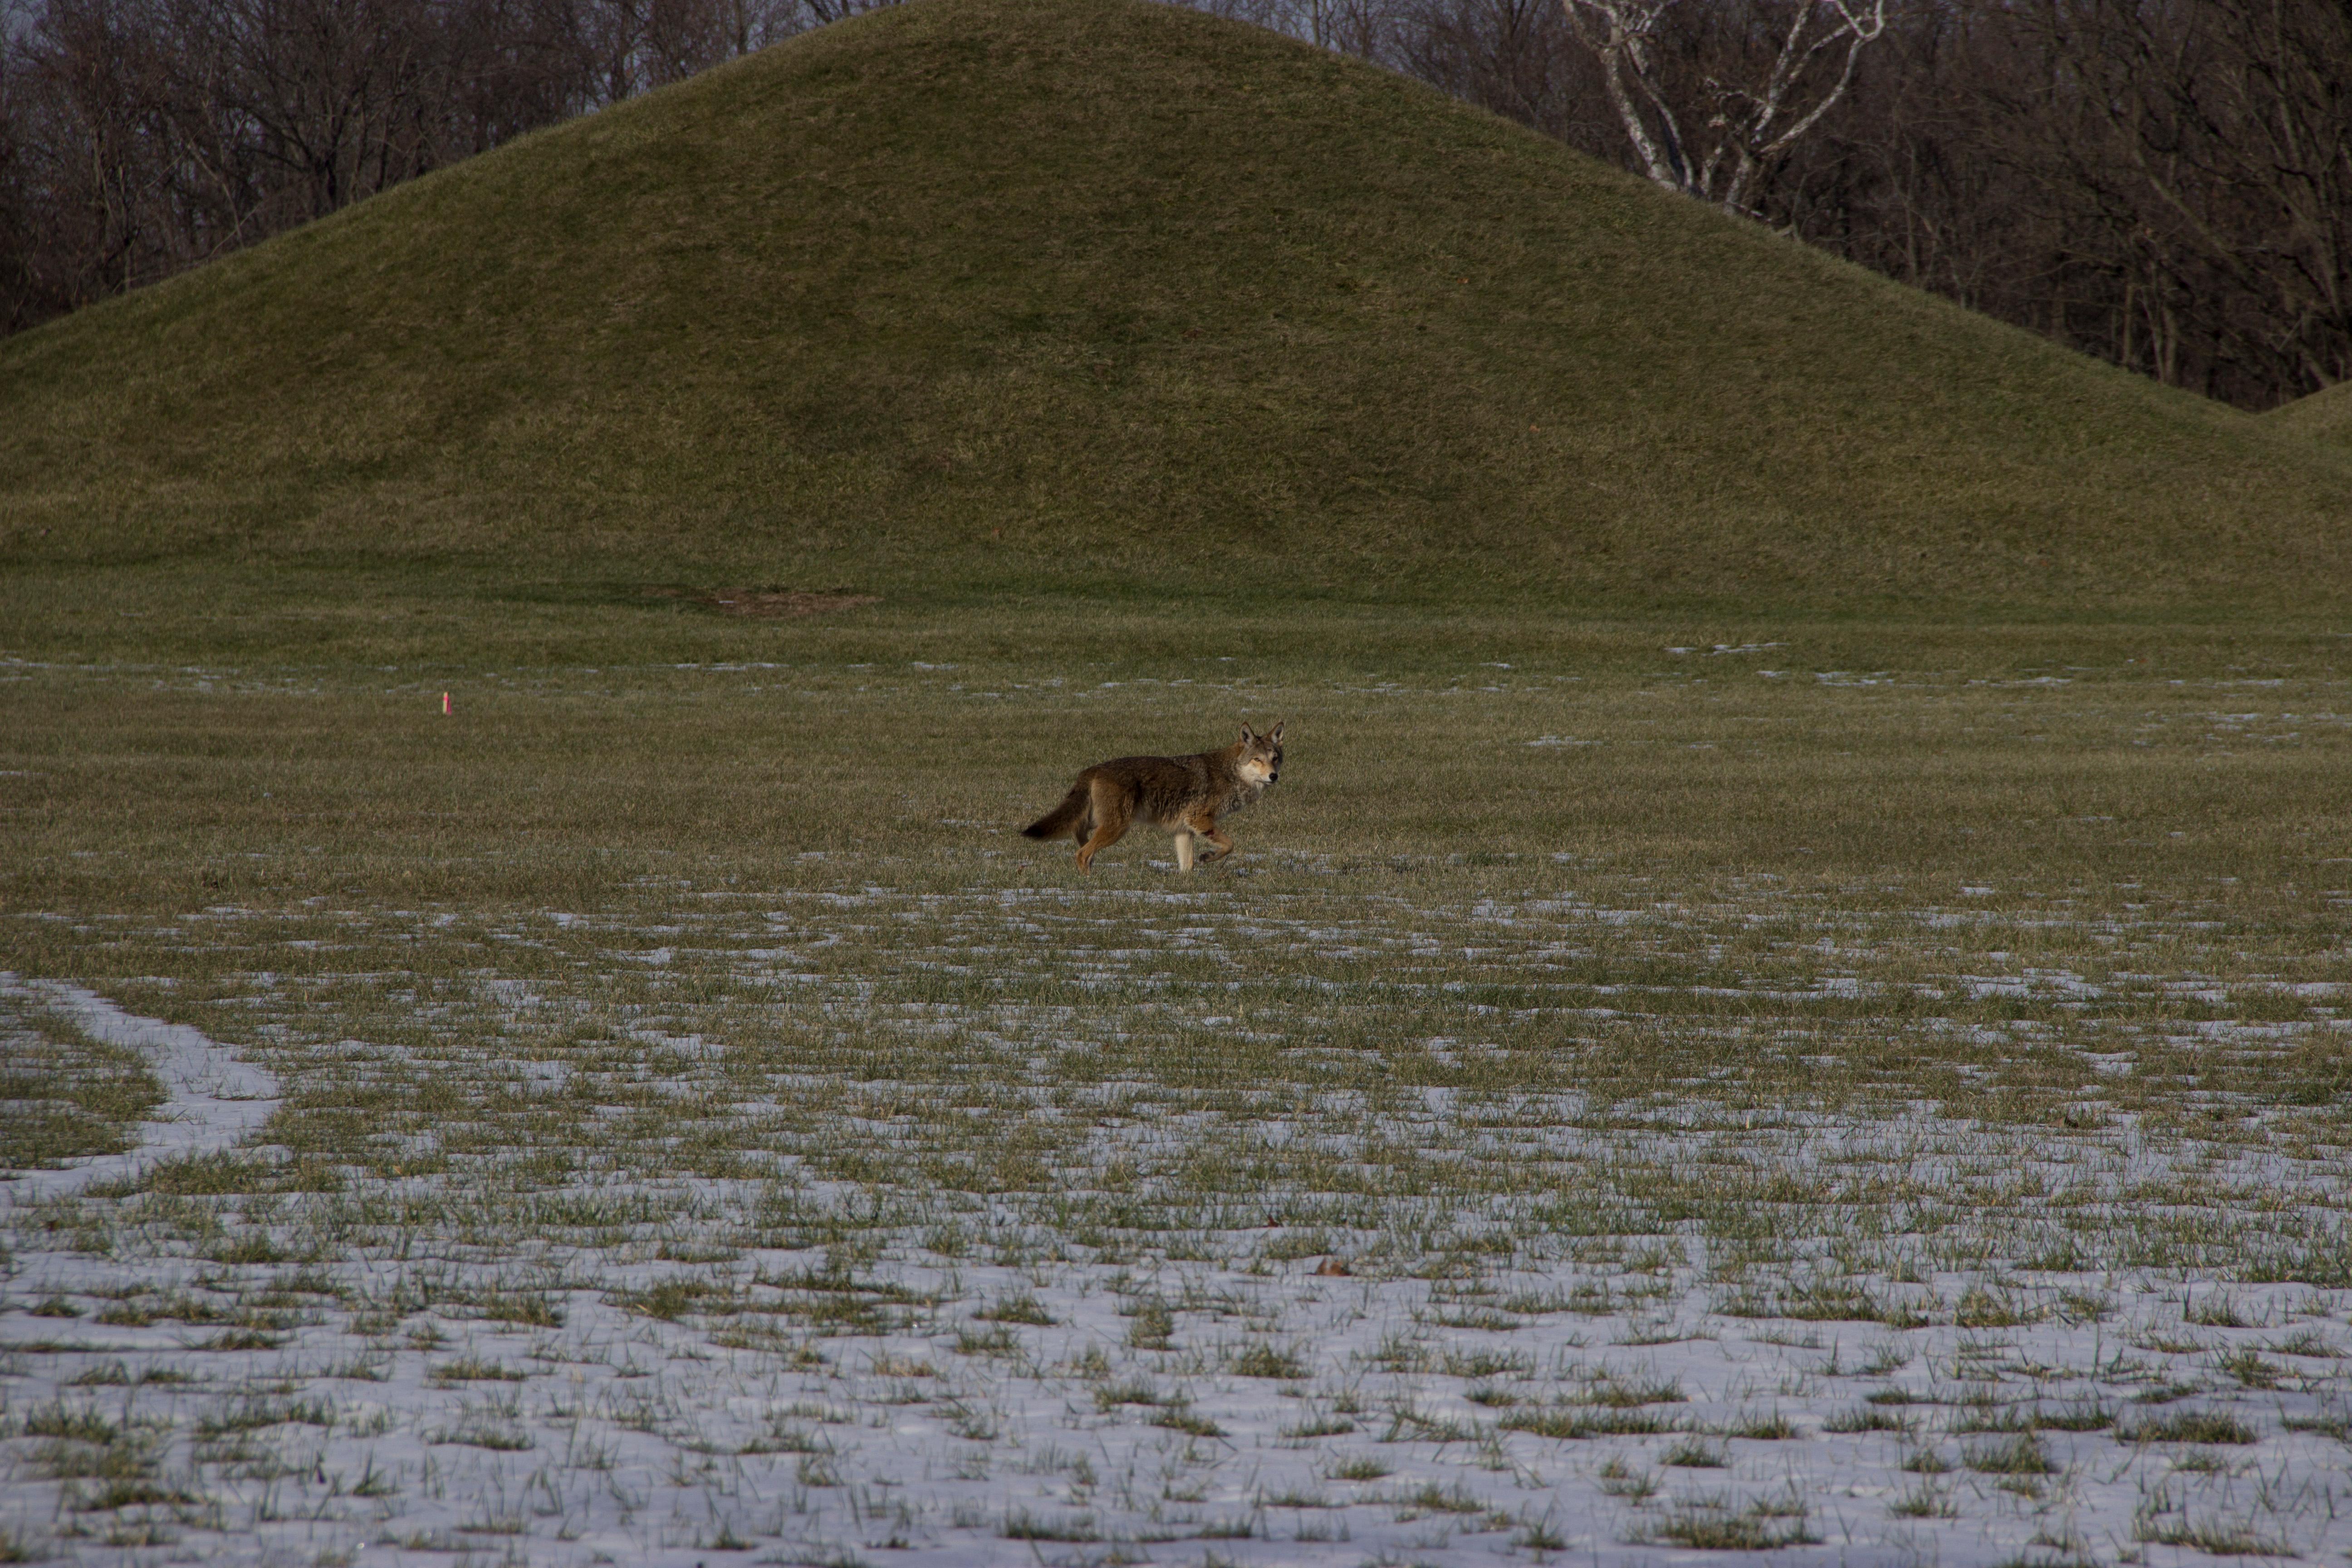 A coyote in the park